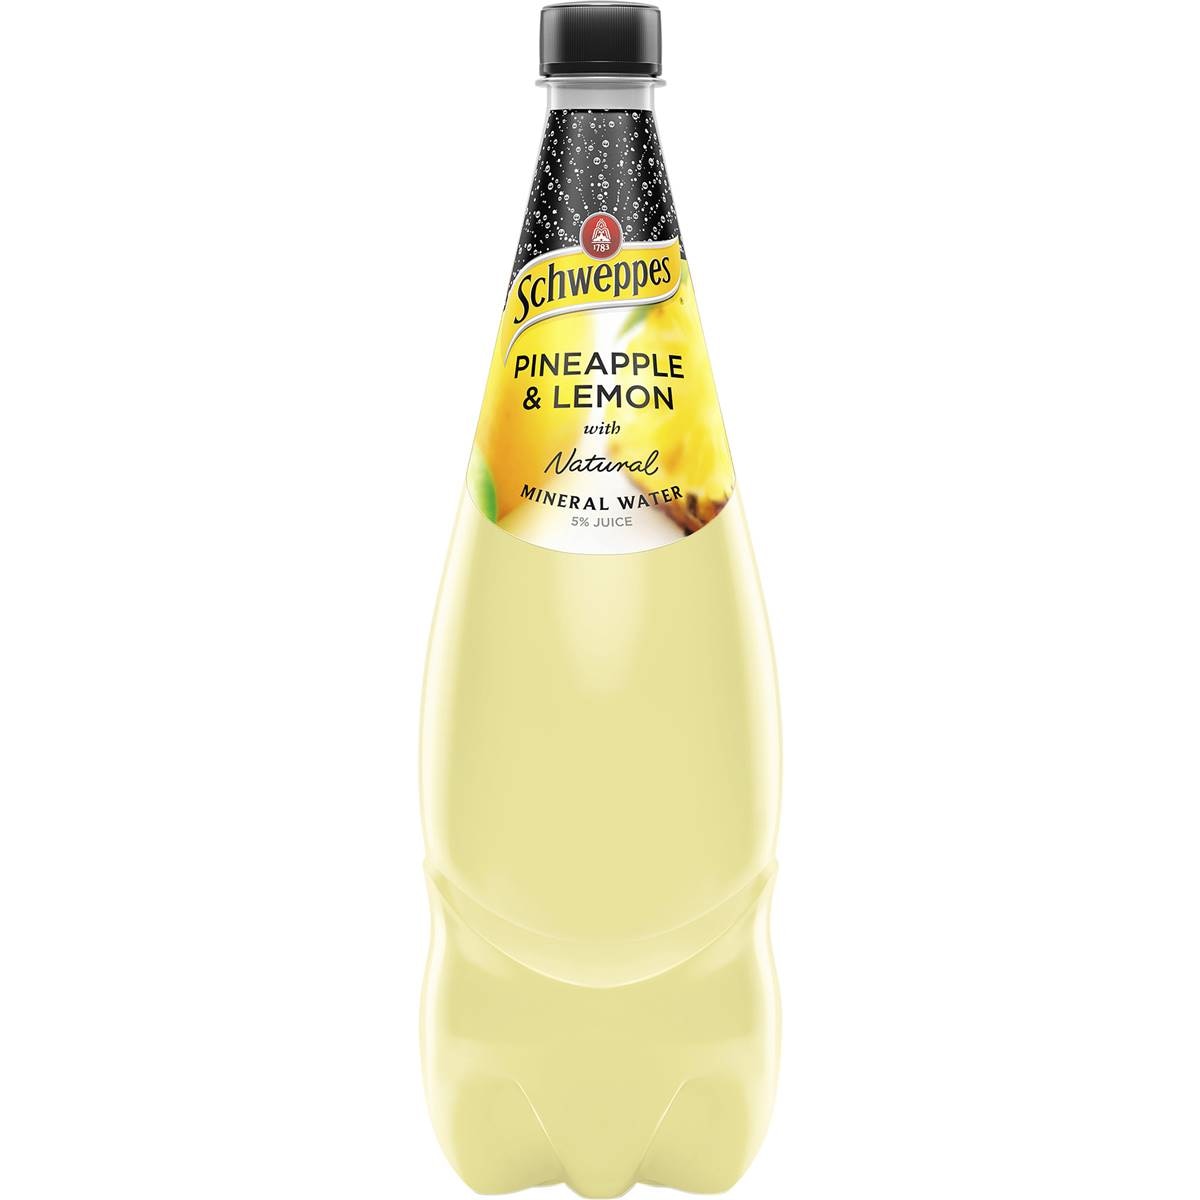 Calories in Schweppes Natural Mineral Water Pineapple & Lemon